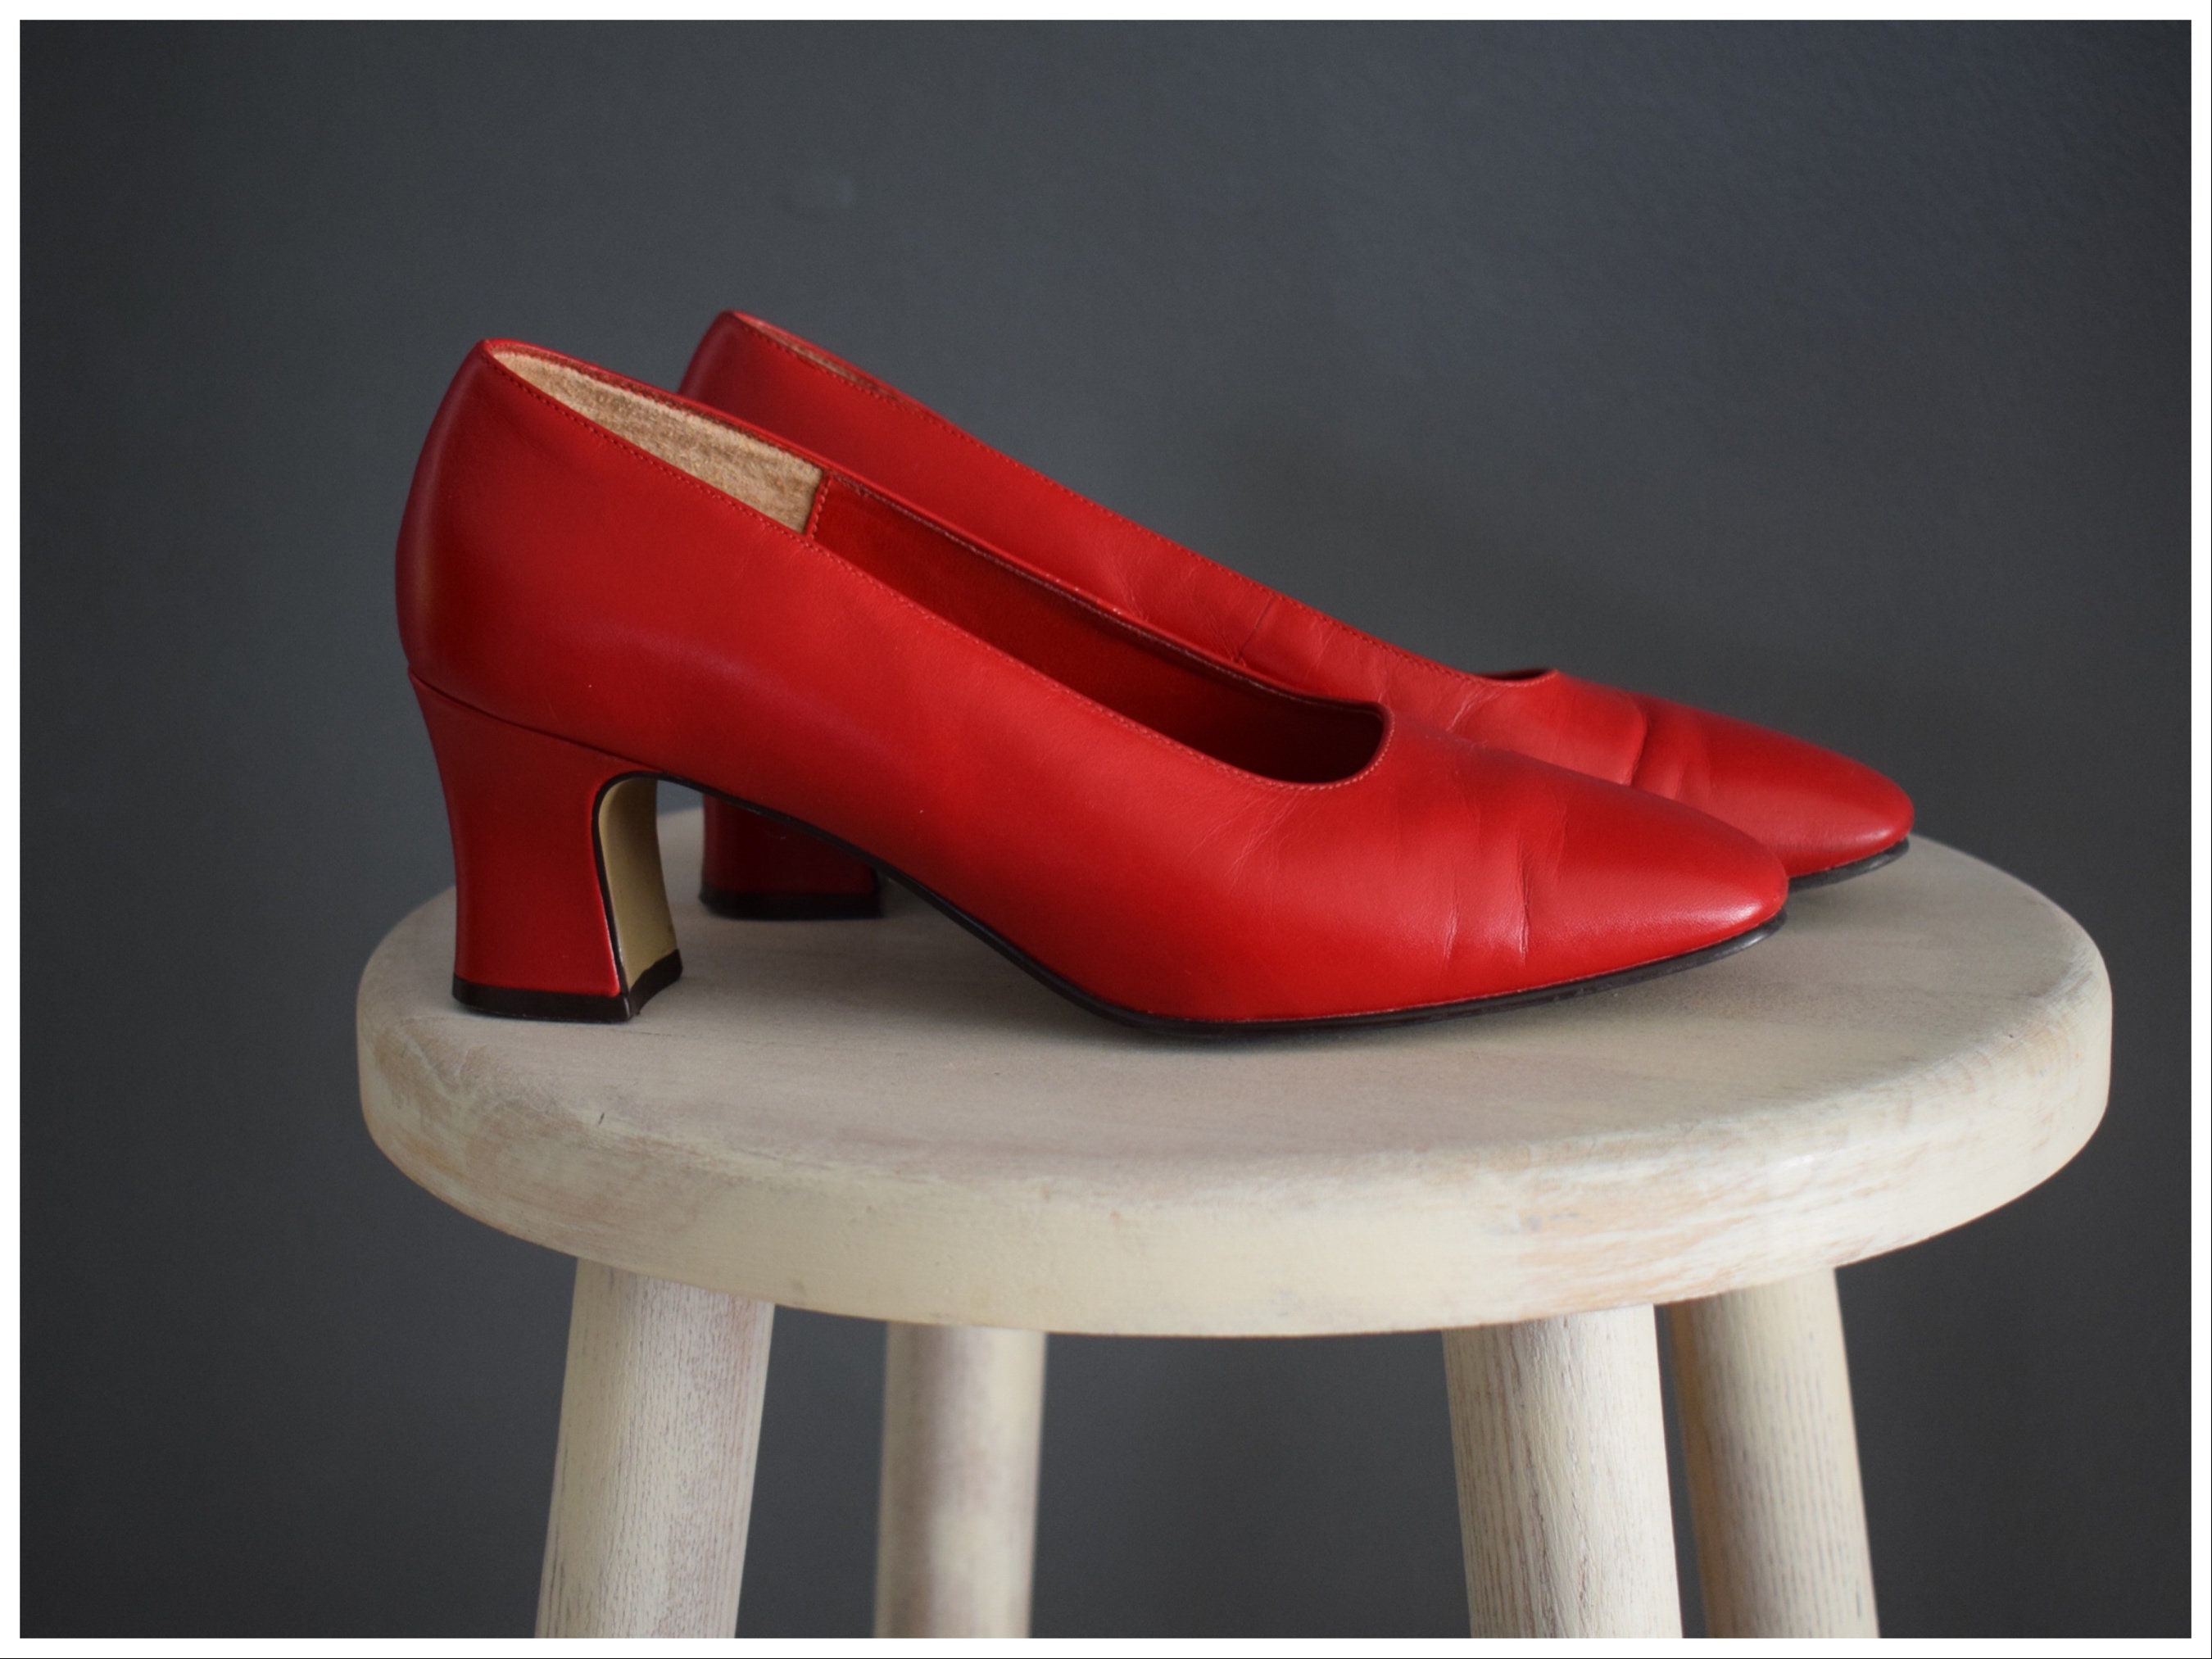 Vintage 1980s 1990s Red Leather Pumps Heels Shoes Size 6.5 